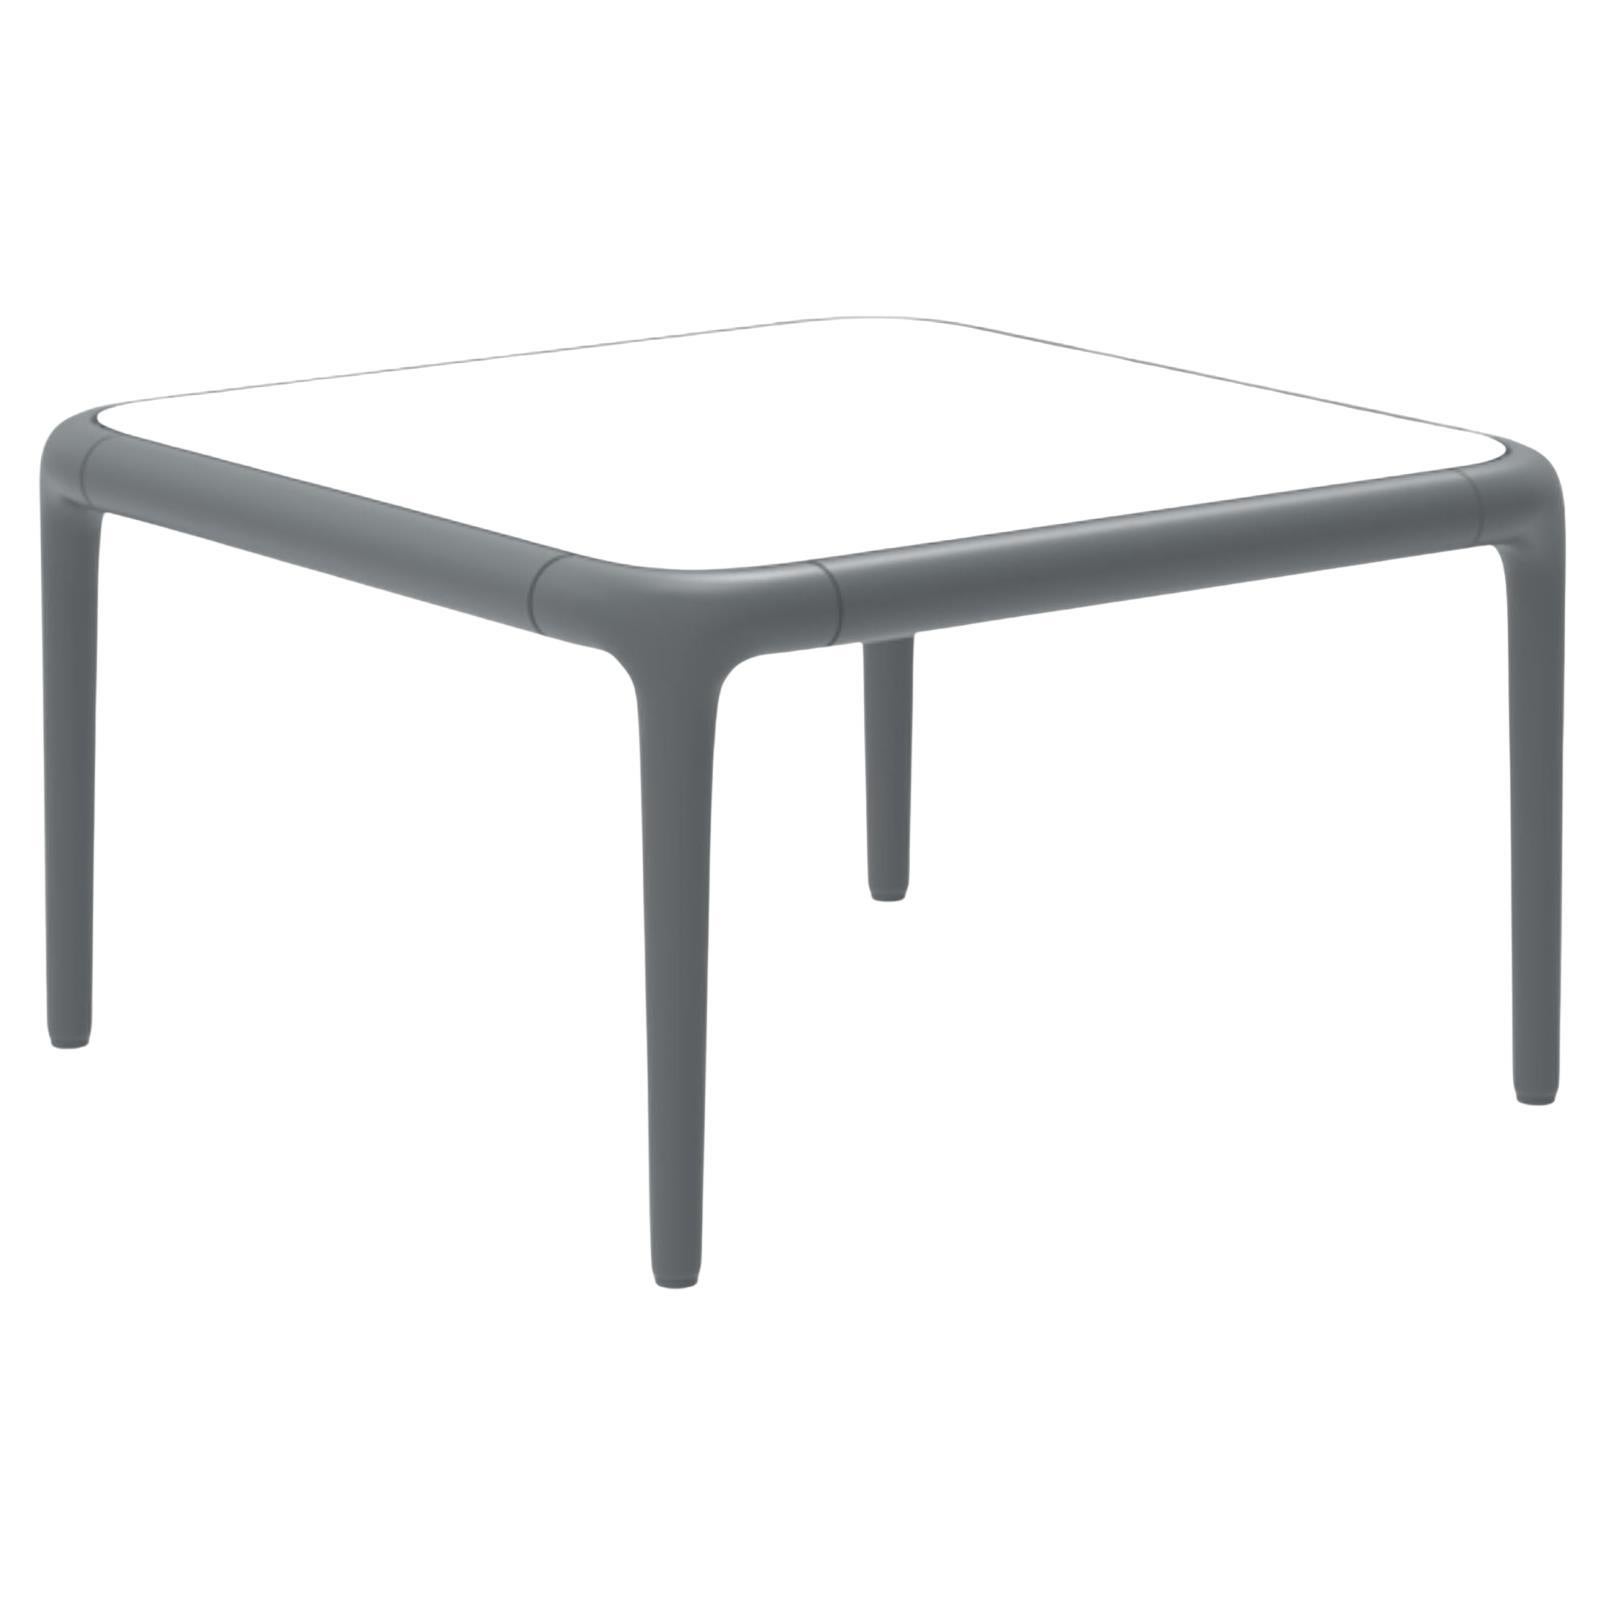 Xaloc Grey Coffee Table 50 with Glass Top by Mowee